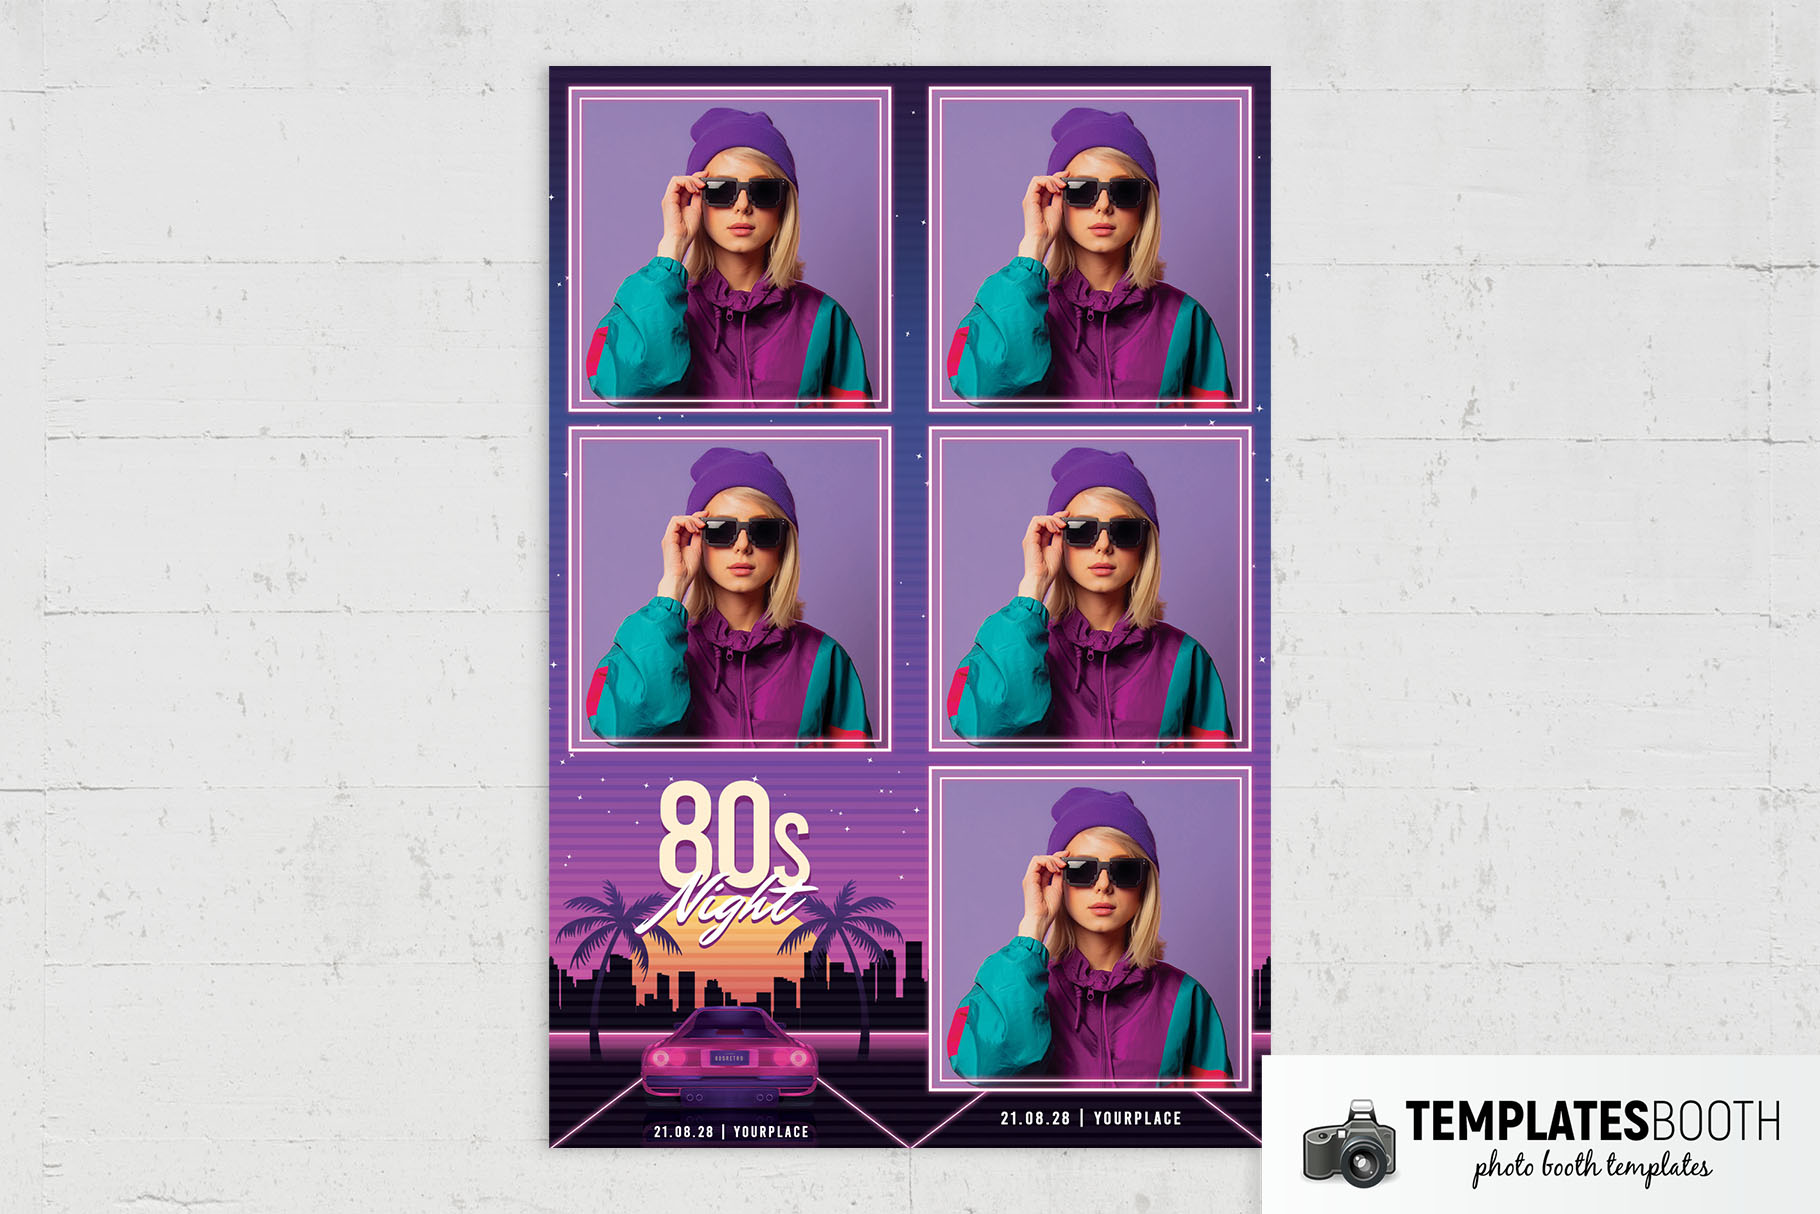 80's Night Photo Booth Template